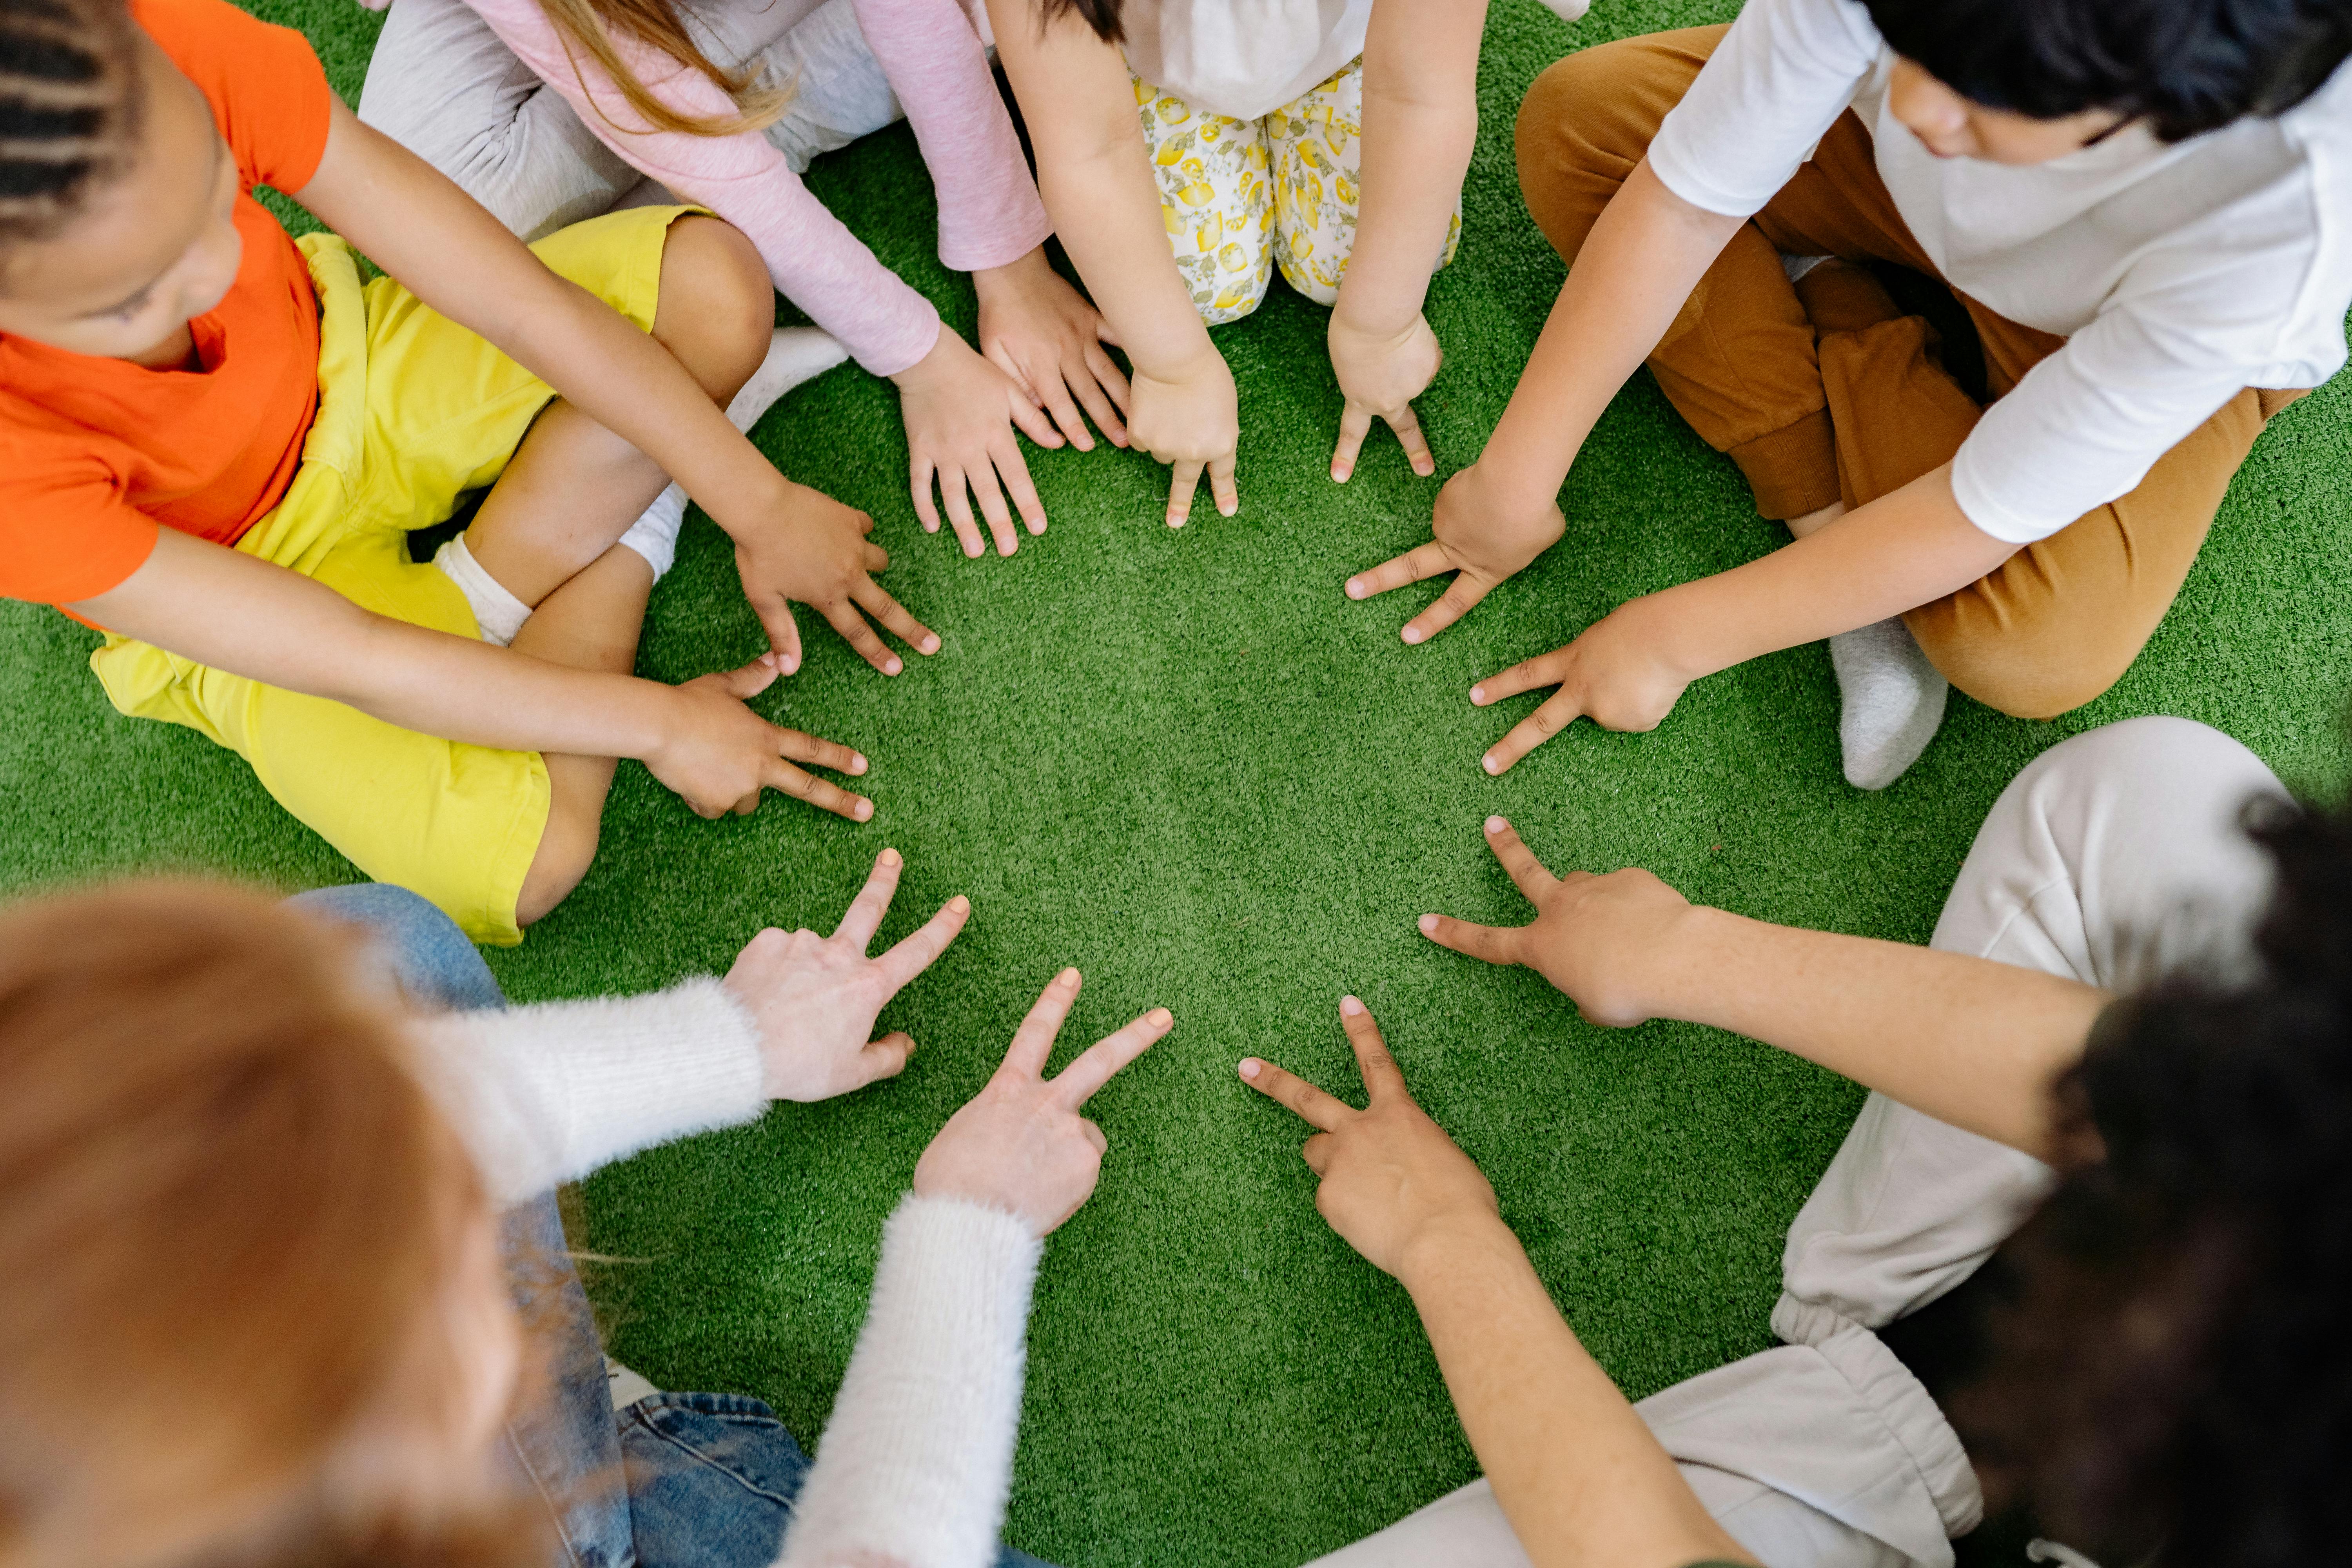 A group of children bonding in an exercise | Source: Pexels